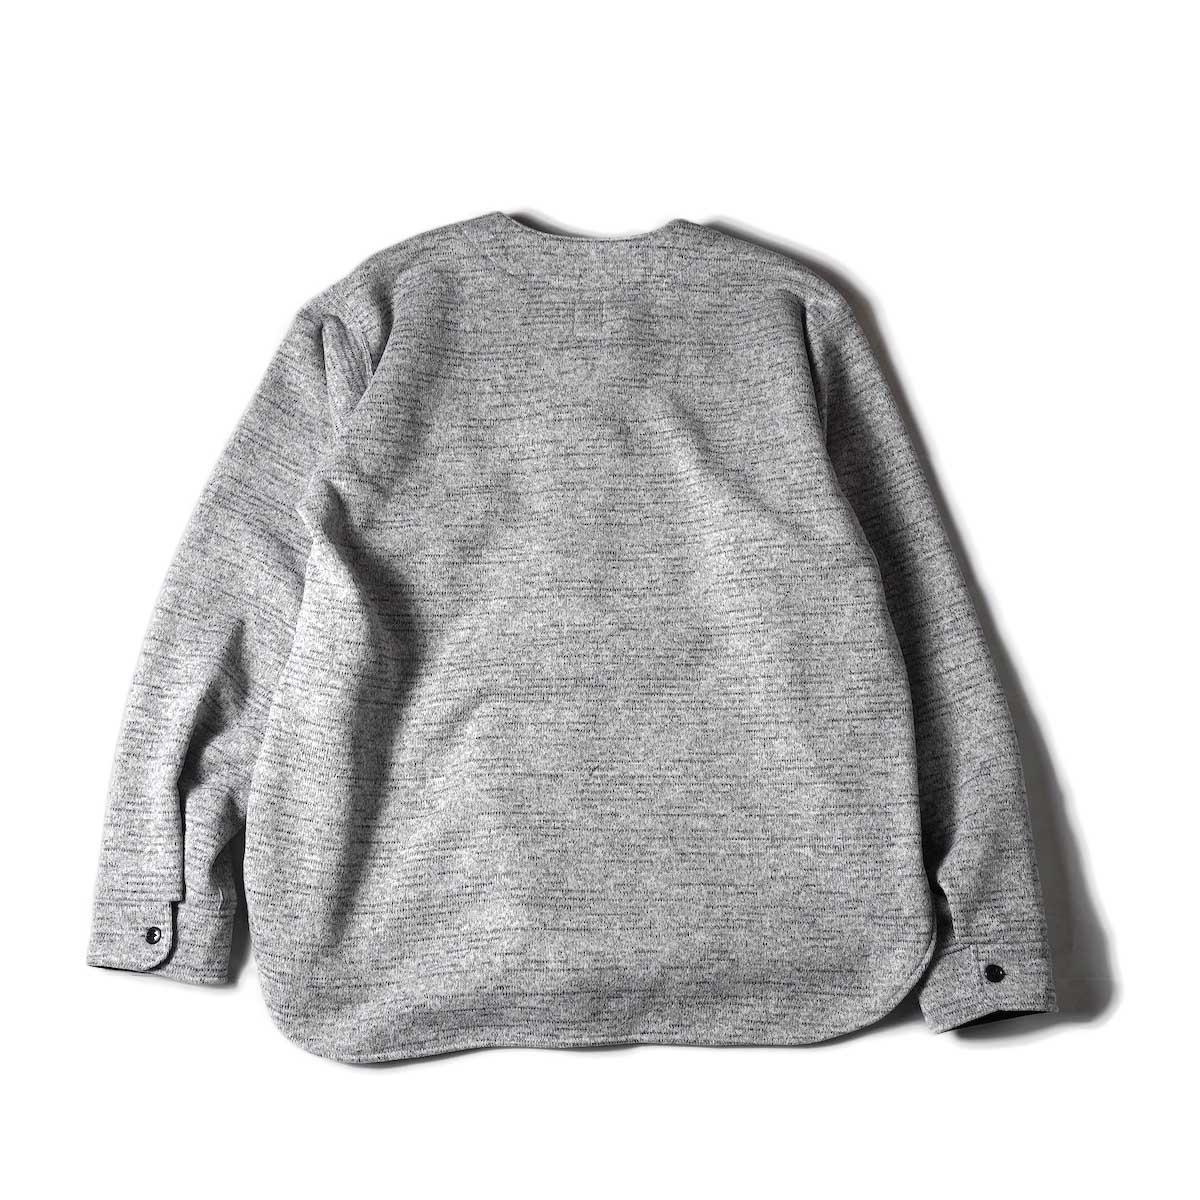 South2 West8 / Scouting Shirt - POLARTEC Fleece Lined Jersey (Grey)背面